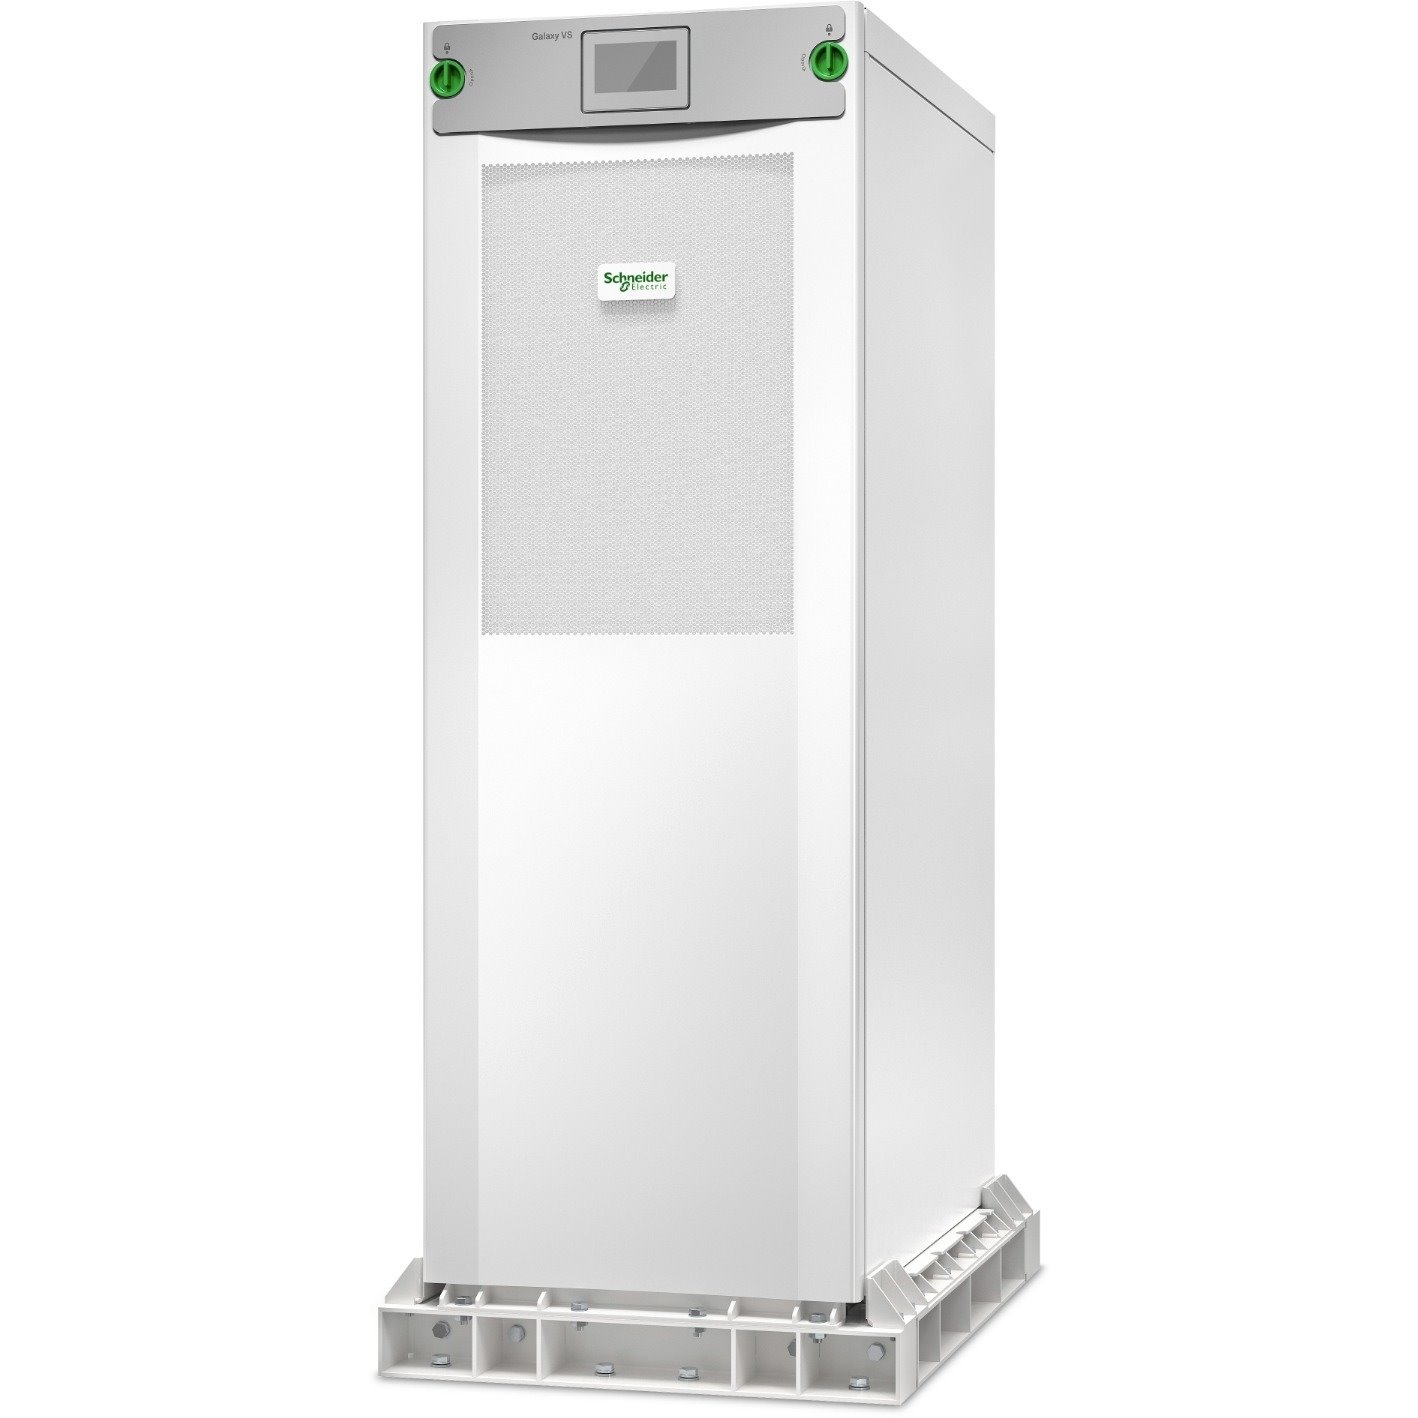 Schneider Electric Galaxy VS Double Conversion Online UPS - 60 kVA/60 kW - Three Phase